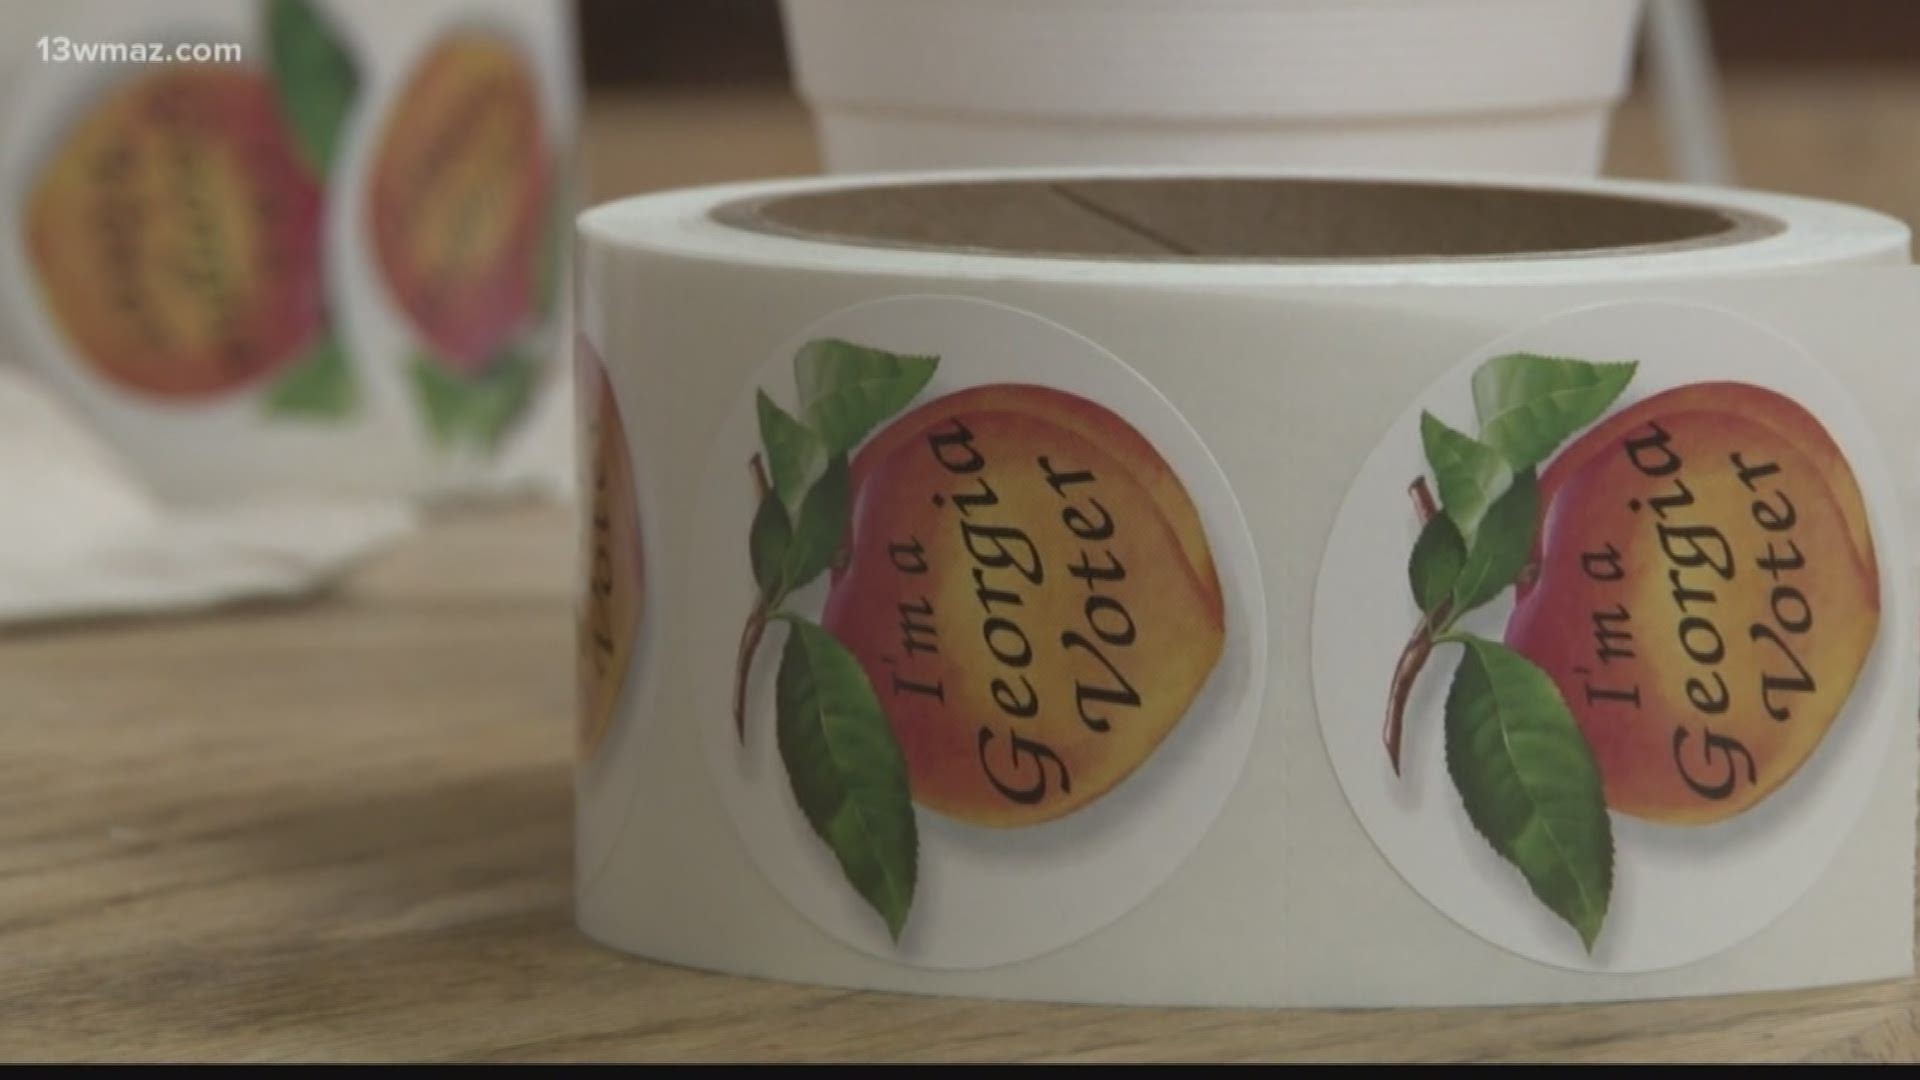 Voters give advice to future ballot casters